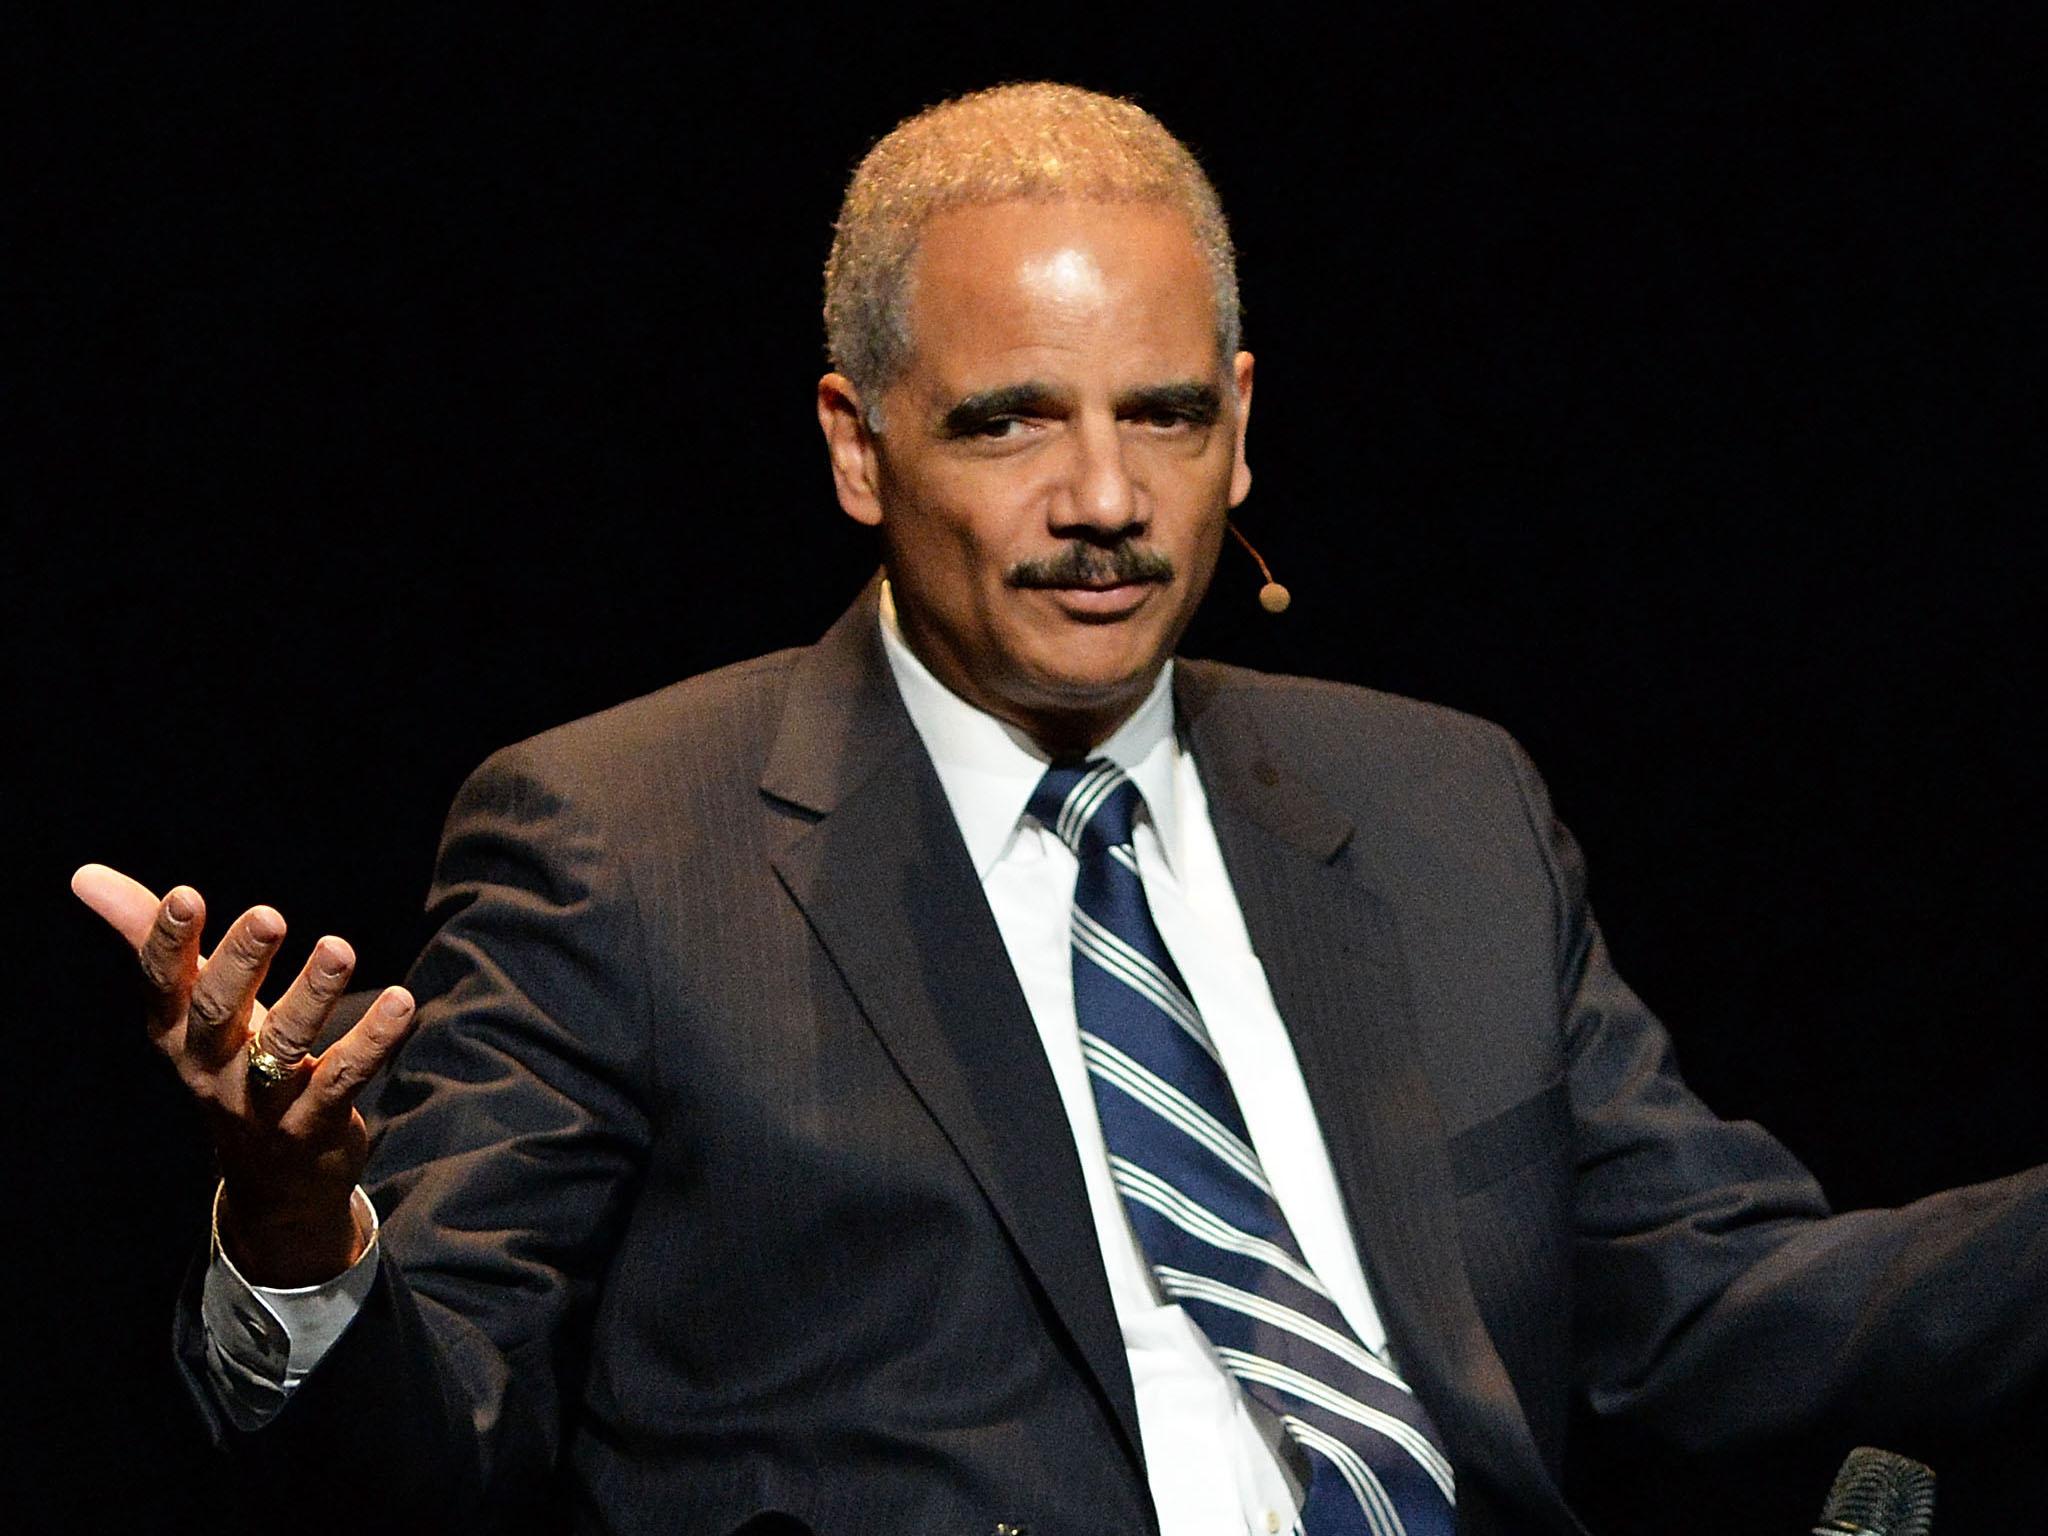 Eric Holder served as US Attorney General under President Barack Obama for six years